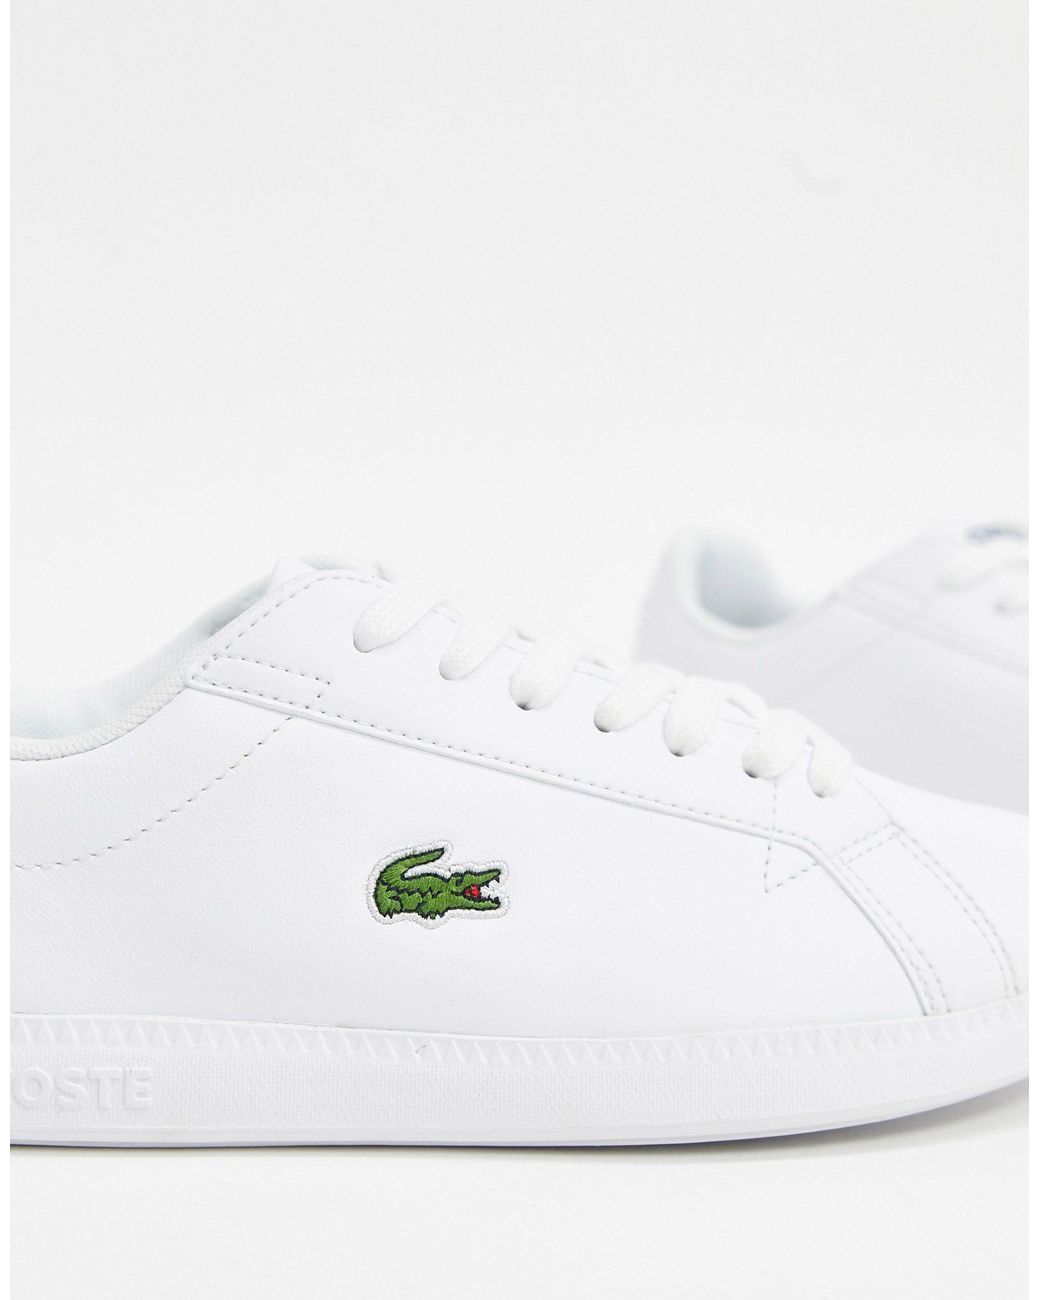 Lacoste Graduate Bl 1 Leather Trainers in White | Lyst Canada